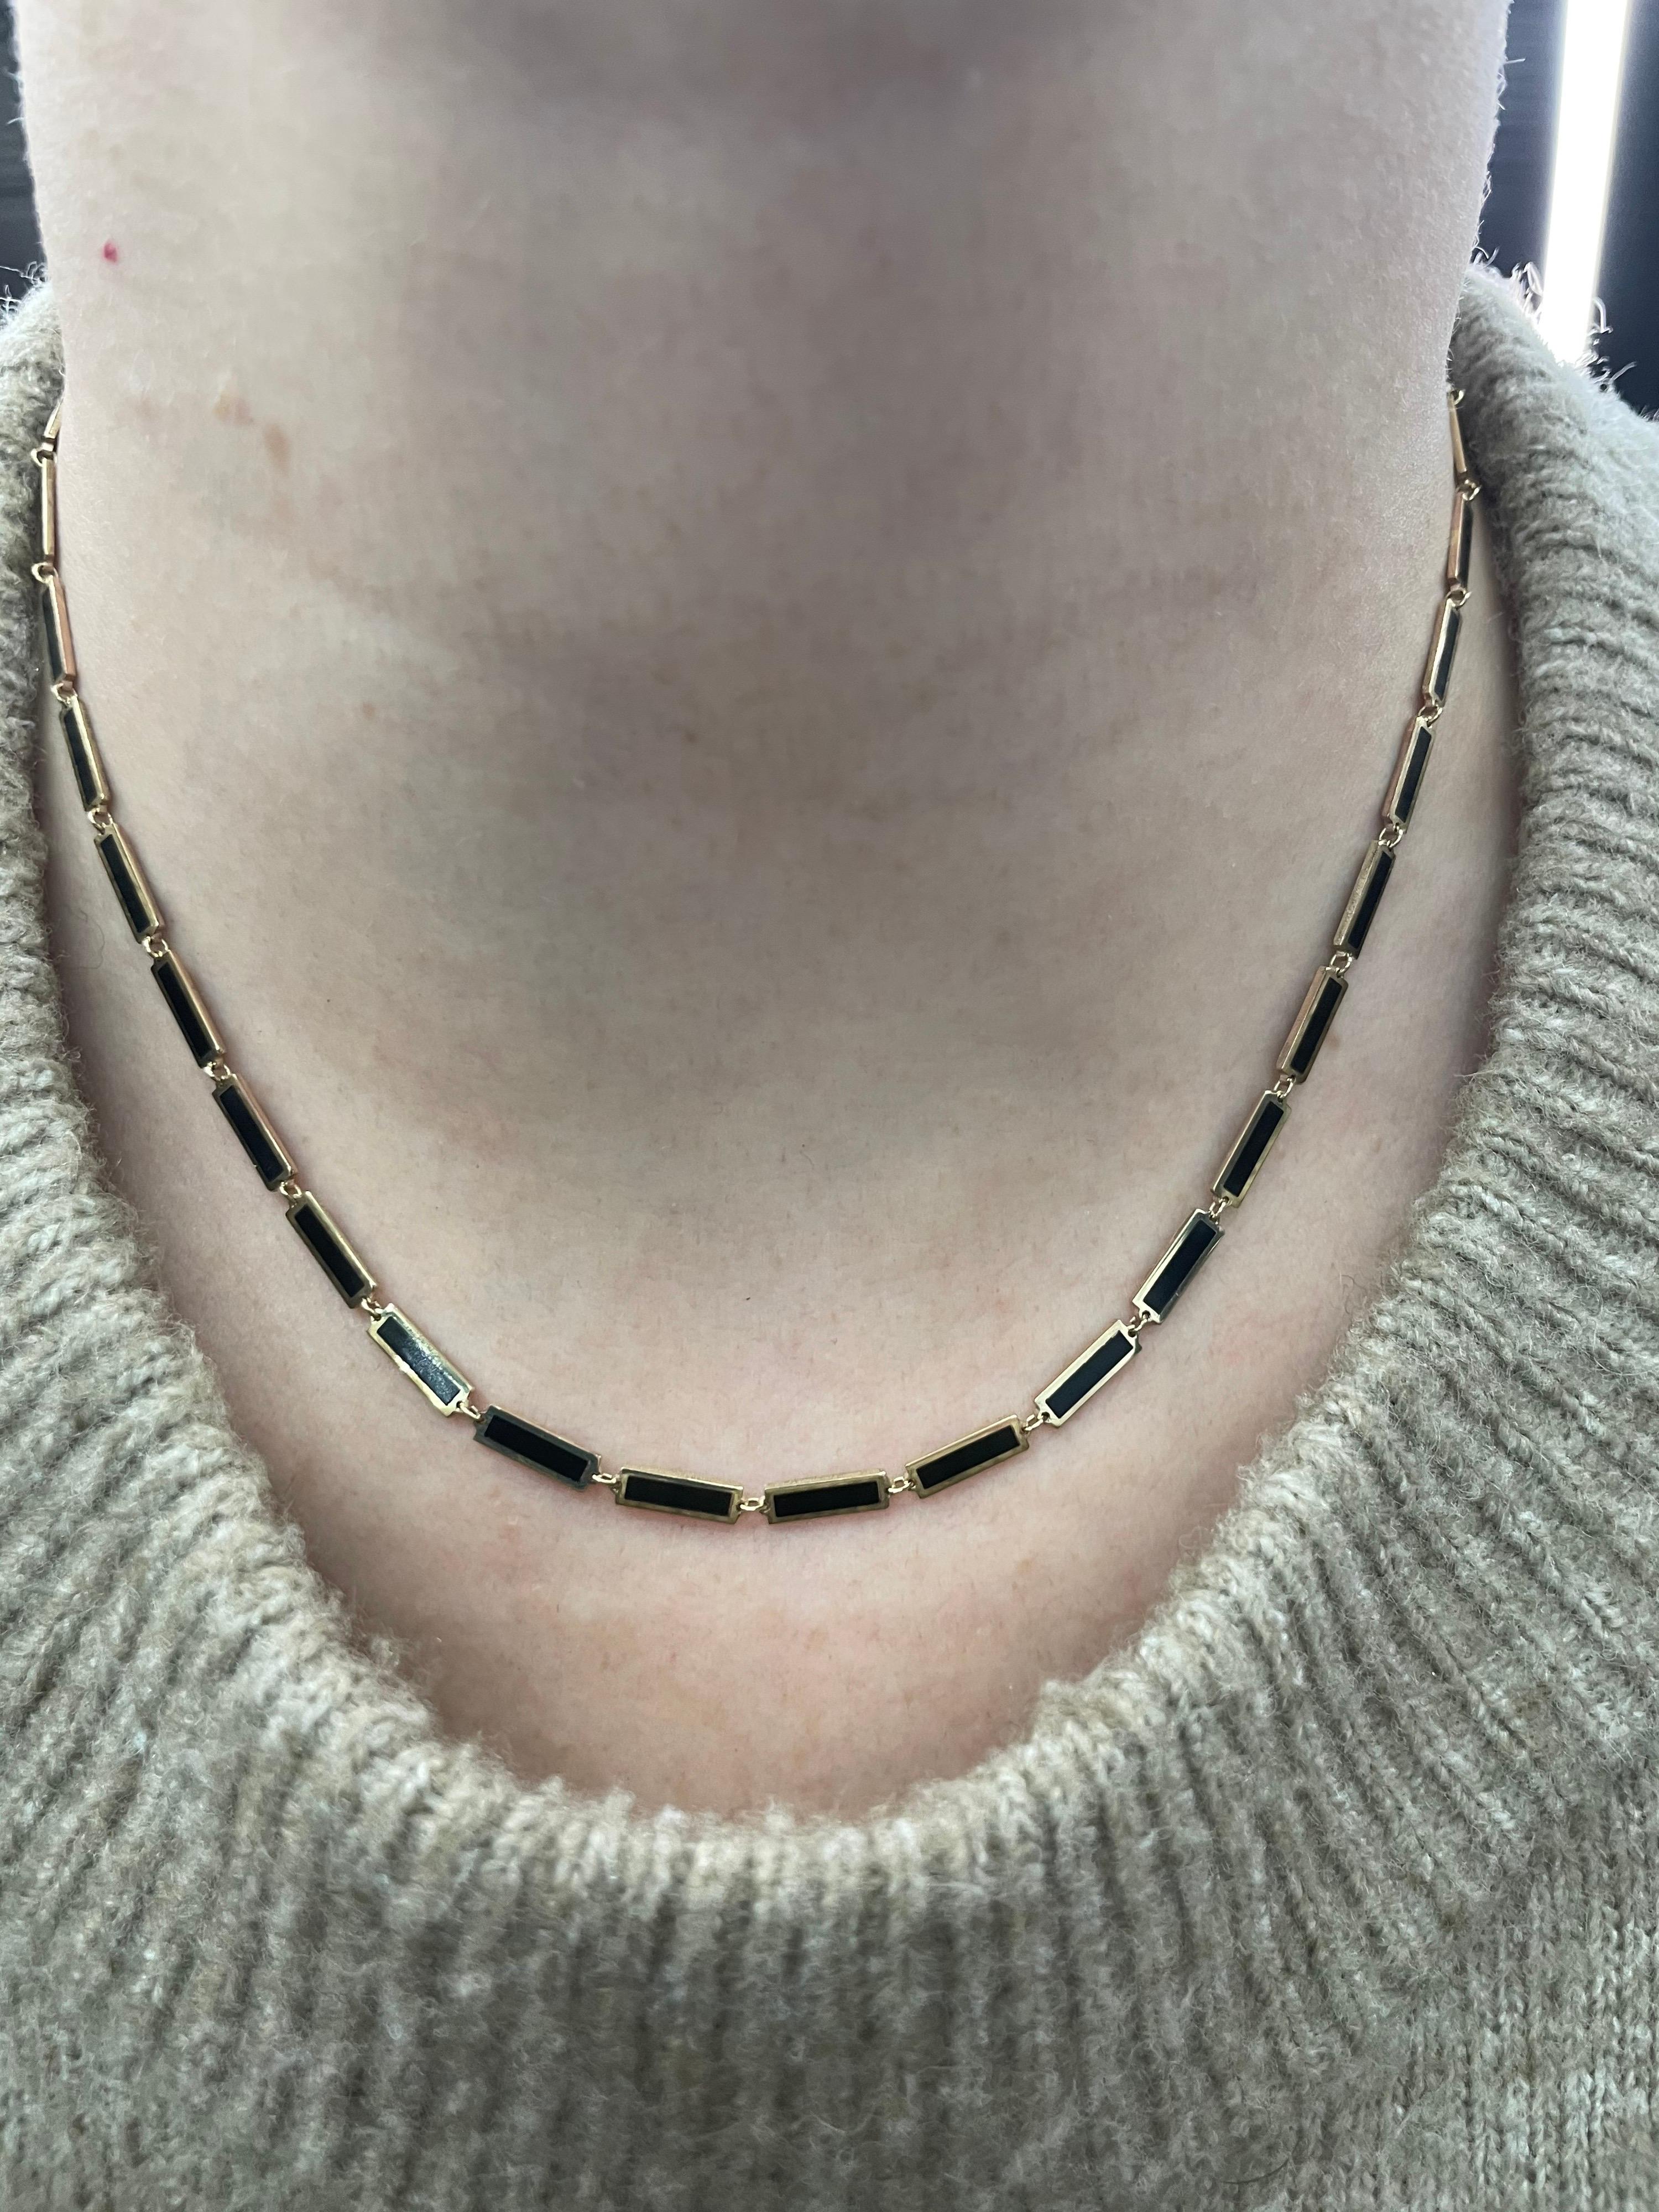 Italian 14k yellow gold necklace featuring onyx and gold trim bars. Super trendy and great for layering!
Available in different colors and styles.
Email to inquire. 